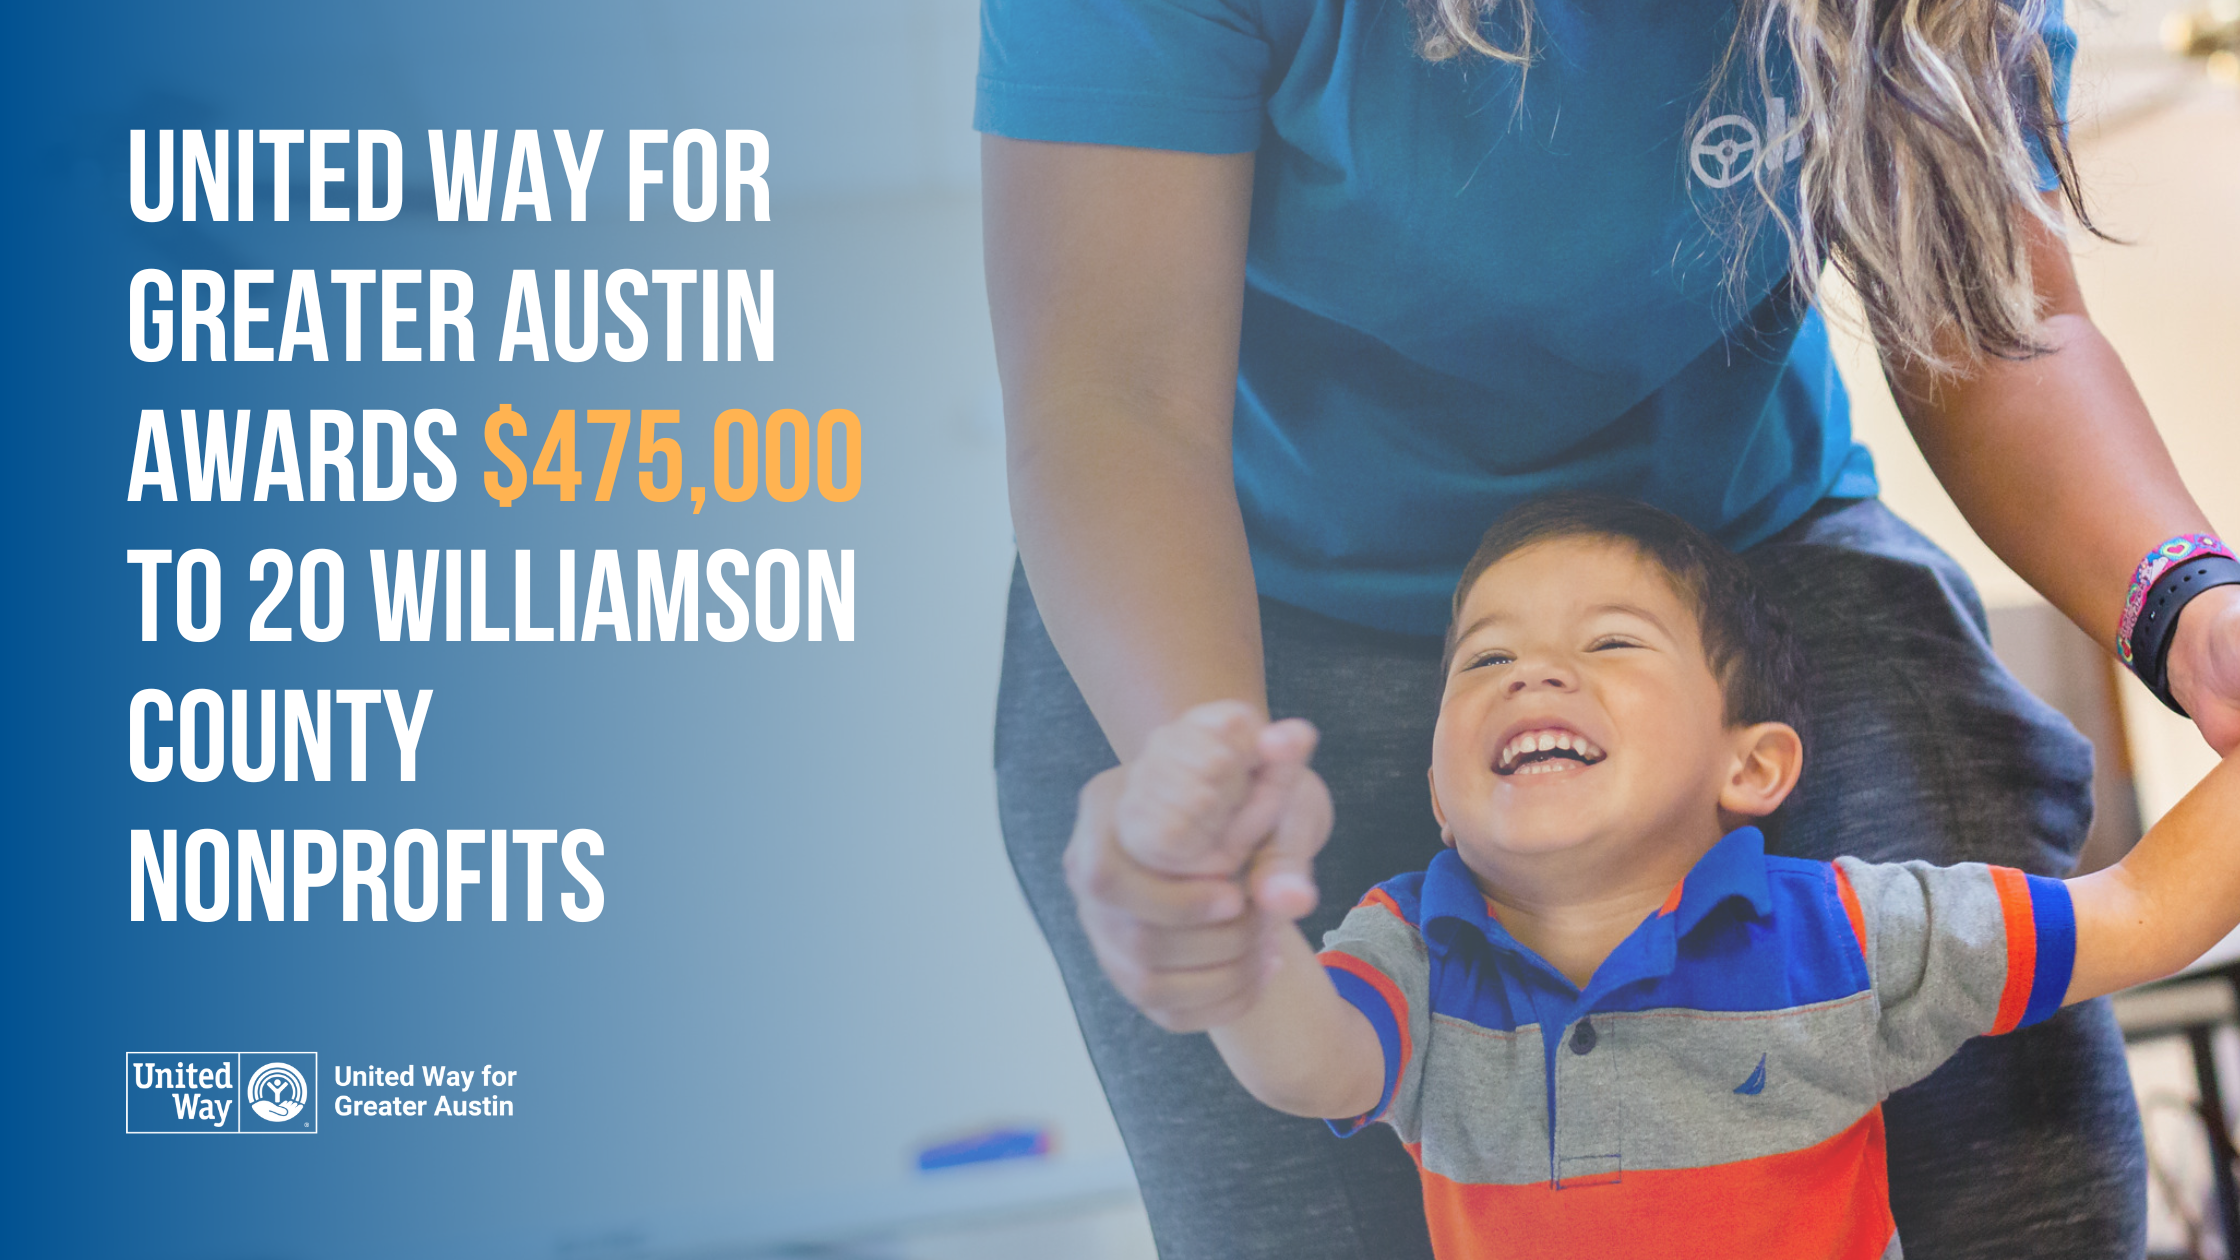 United Way for Greater Austin Awards $475,000 to 20 Williamson County Nonprofits